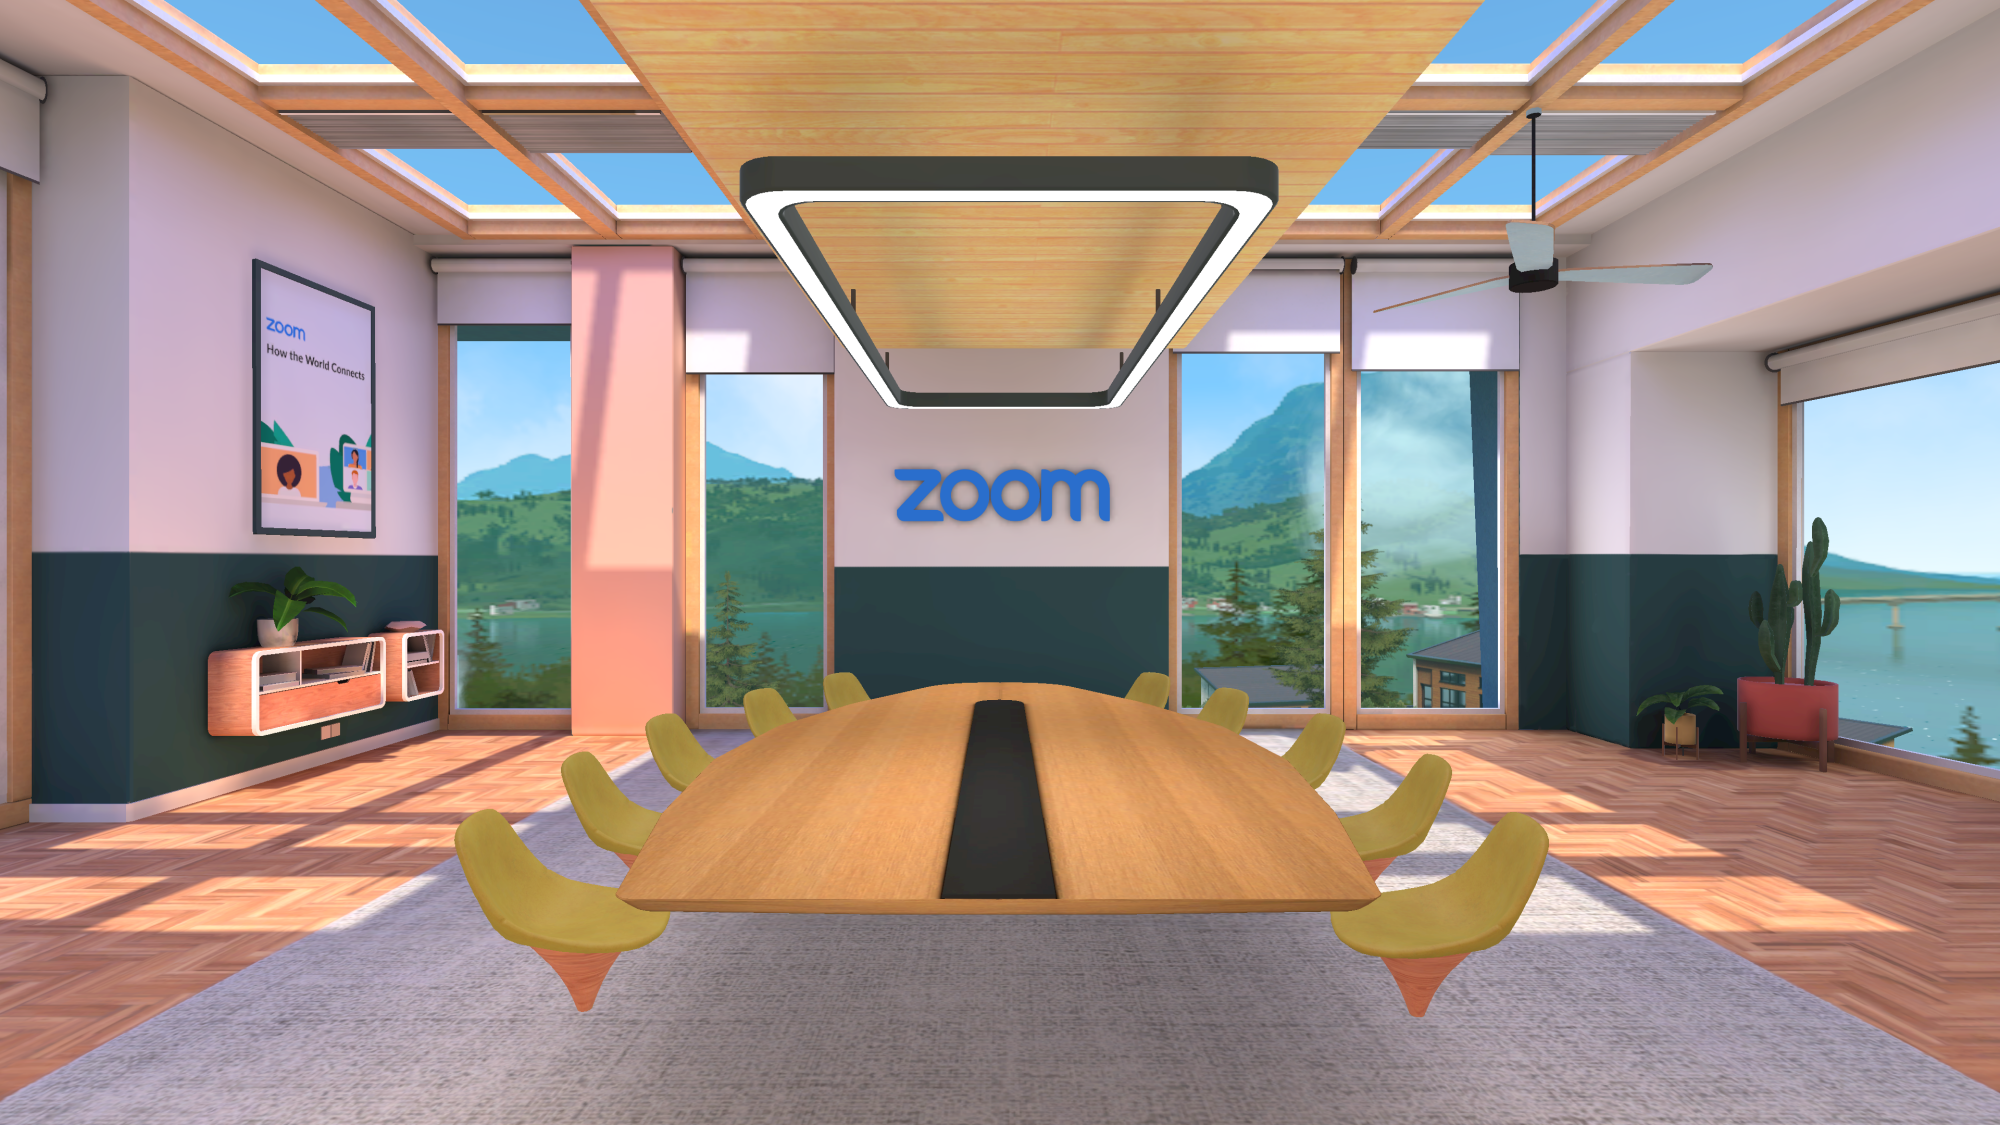 Horizon Workrooms will soon let businesses customize their spaces.